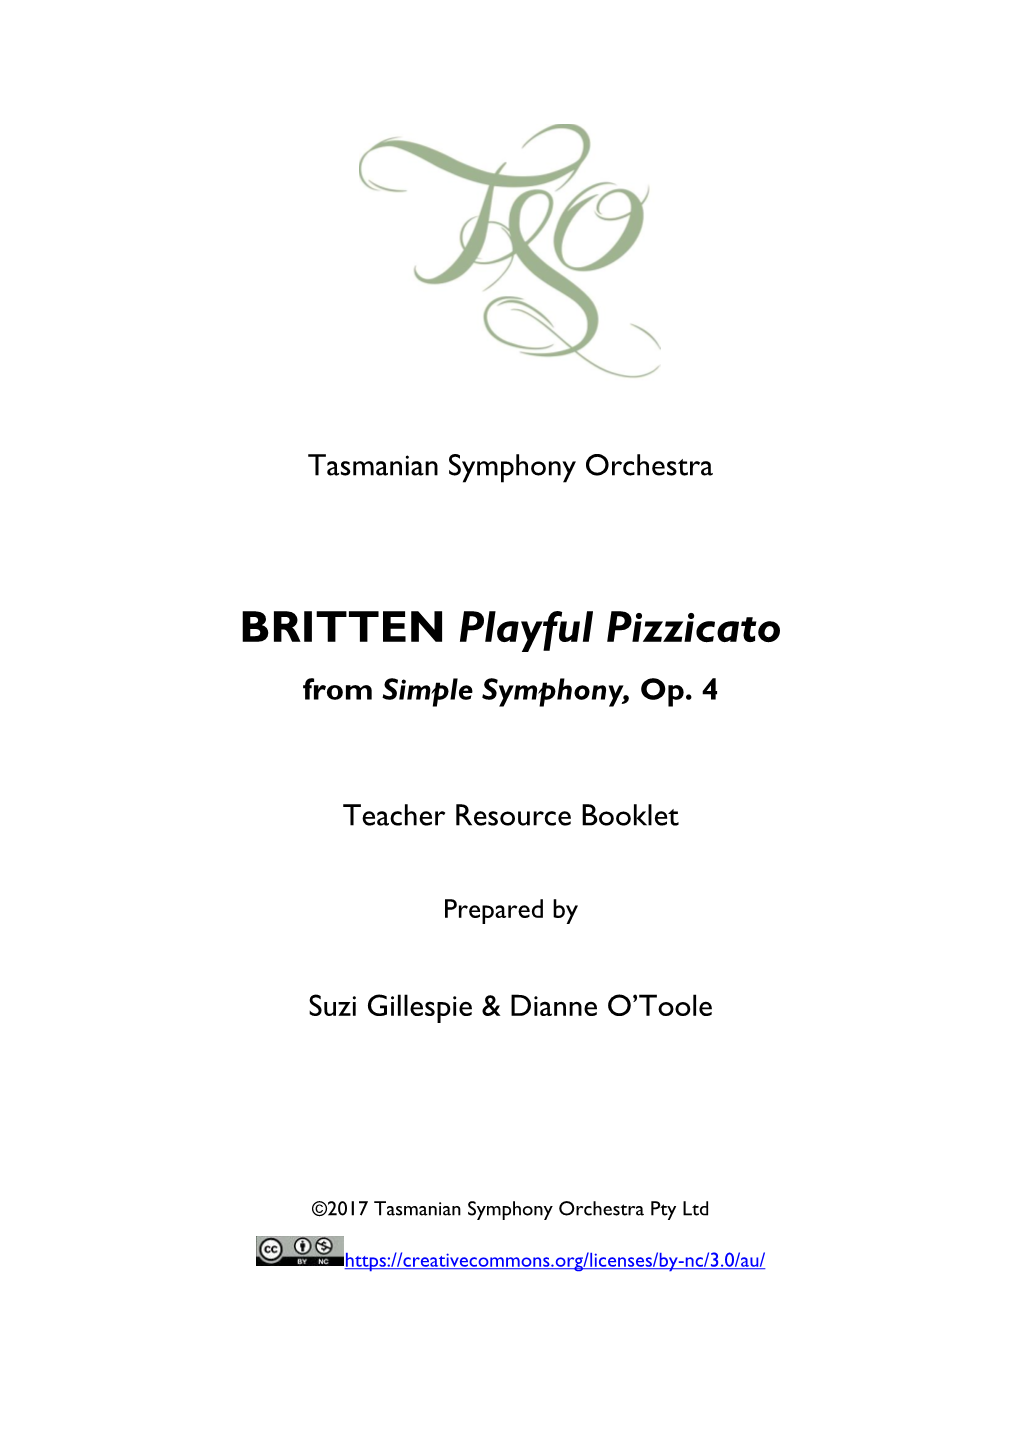 BRITTEN Playful Pizzicato from Simple Symphony, Op